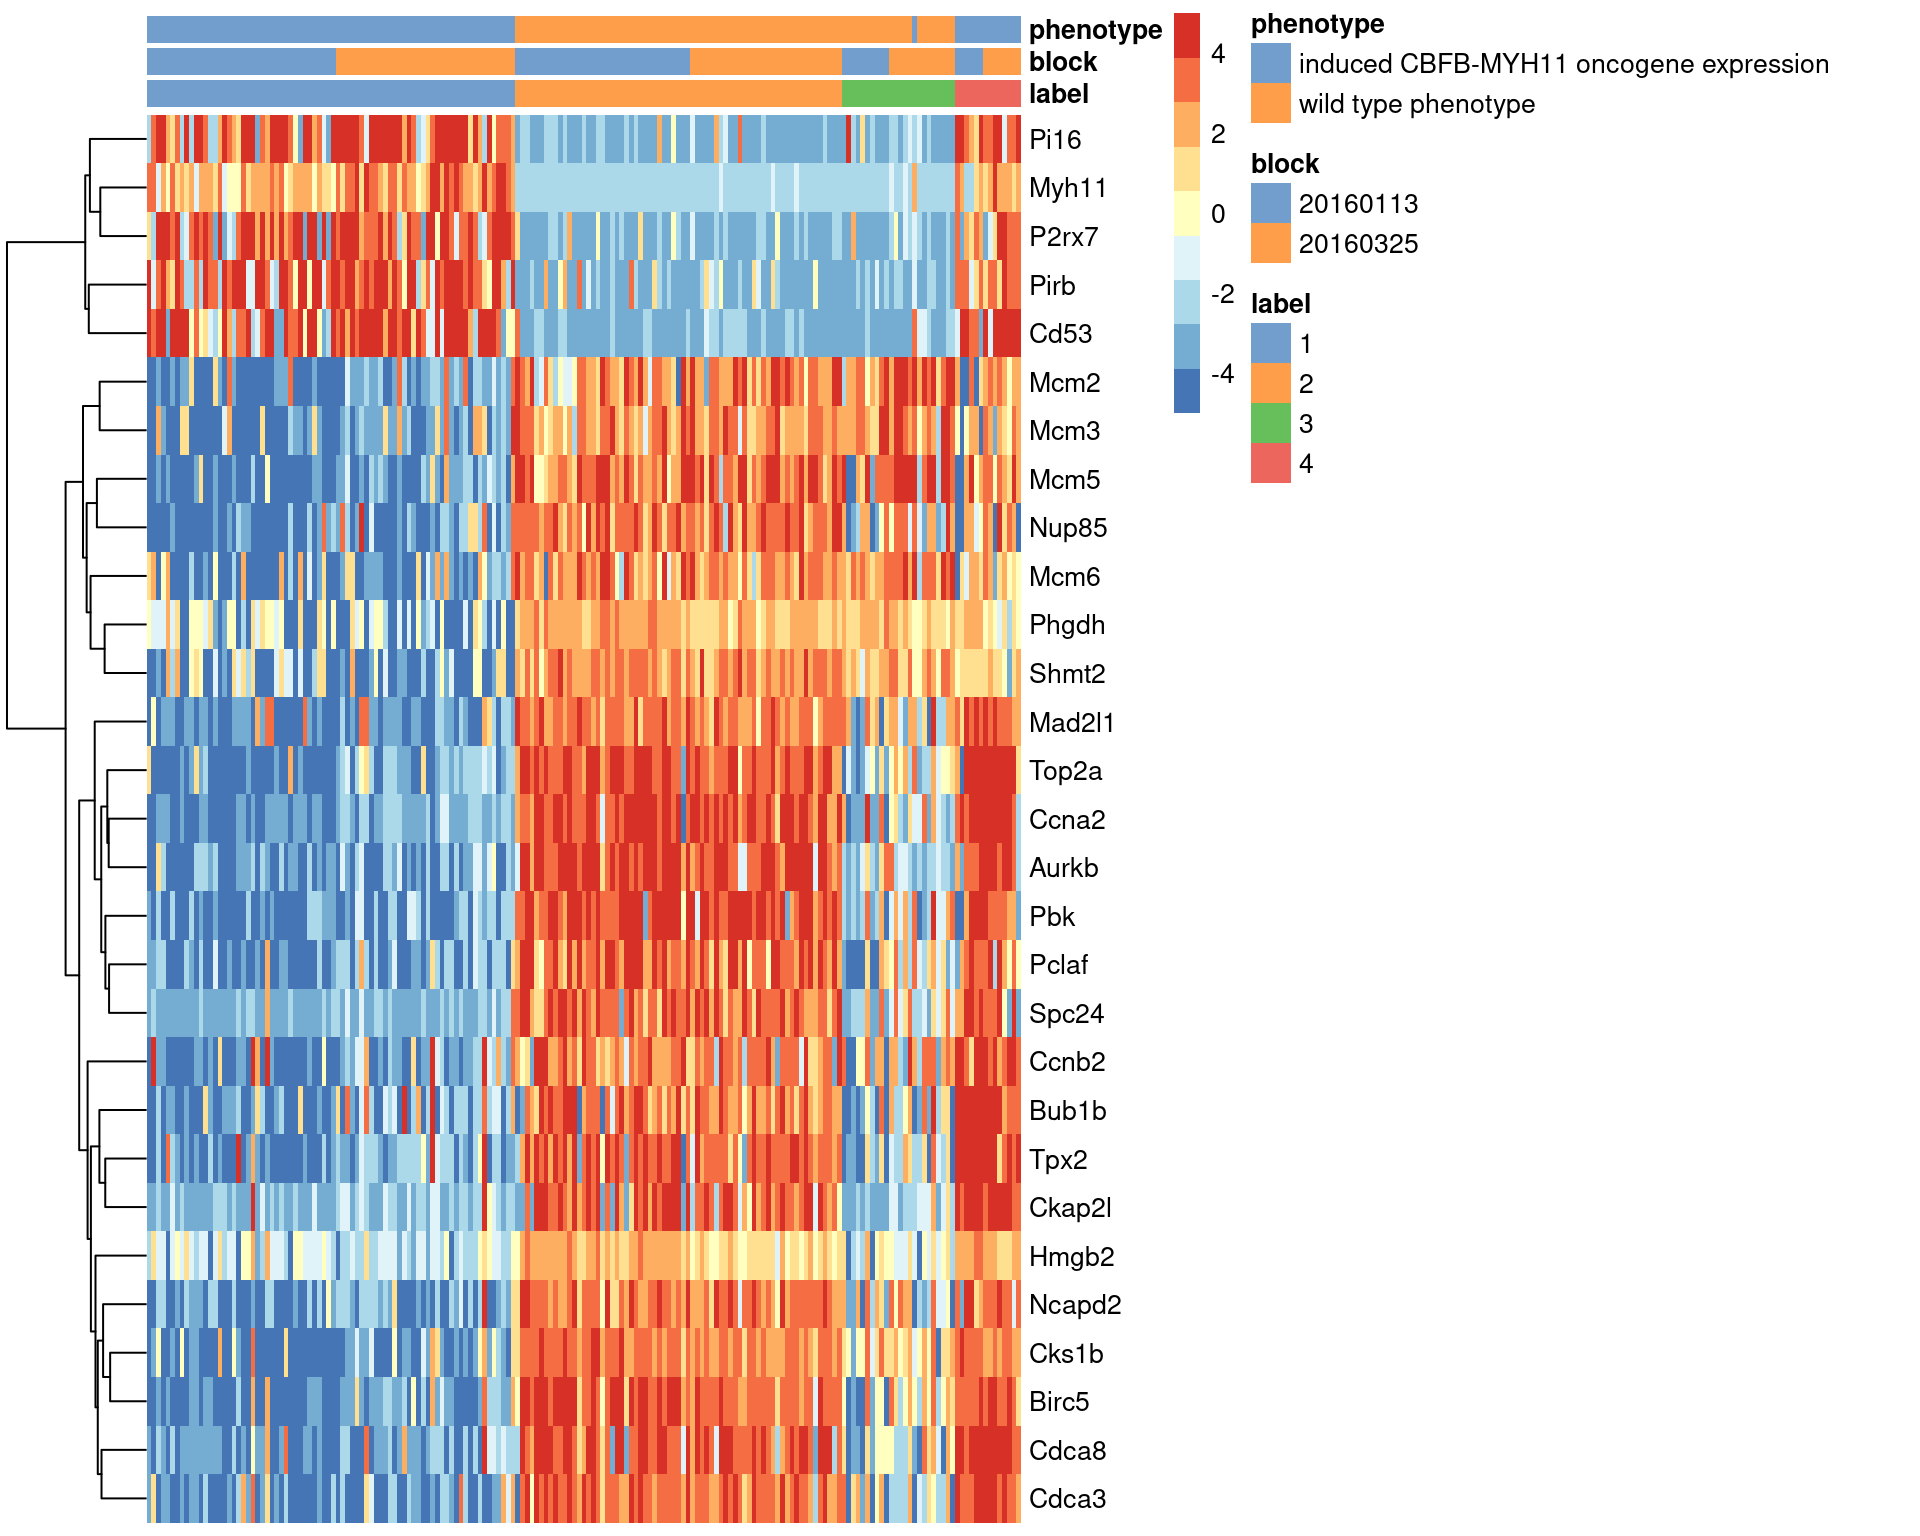 Heatmap of the top marker genes for cluster 1 in the 416B dataset, stratified by cluster. The plate of origin and oncogene induction status are also shown for each cell.